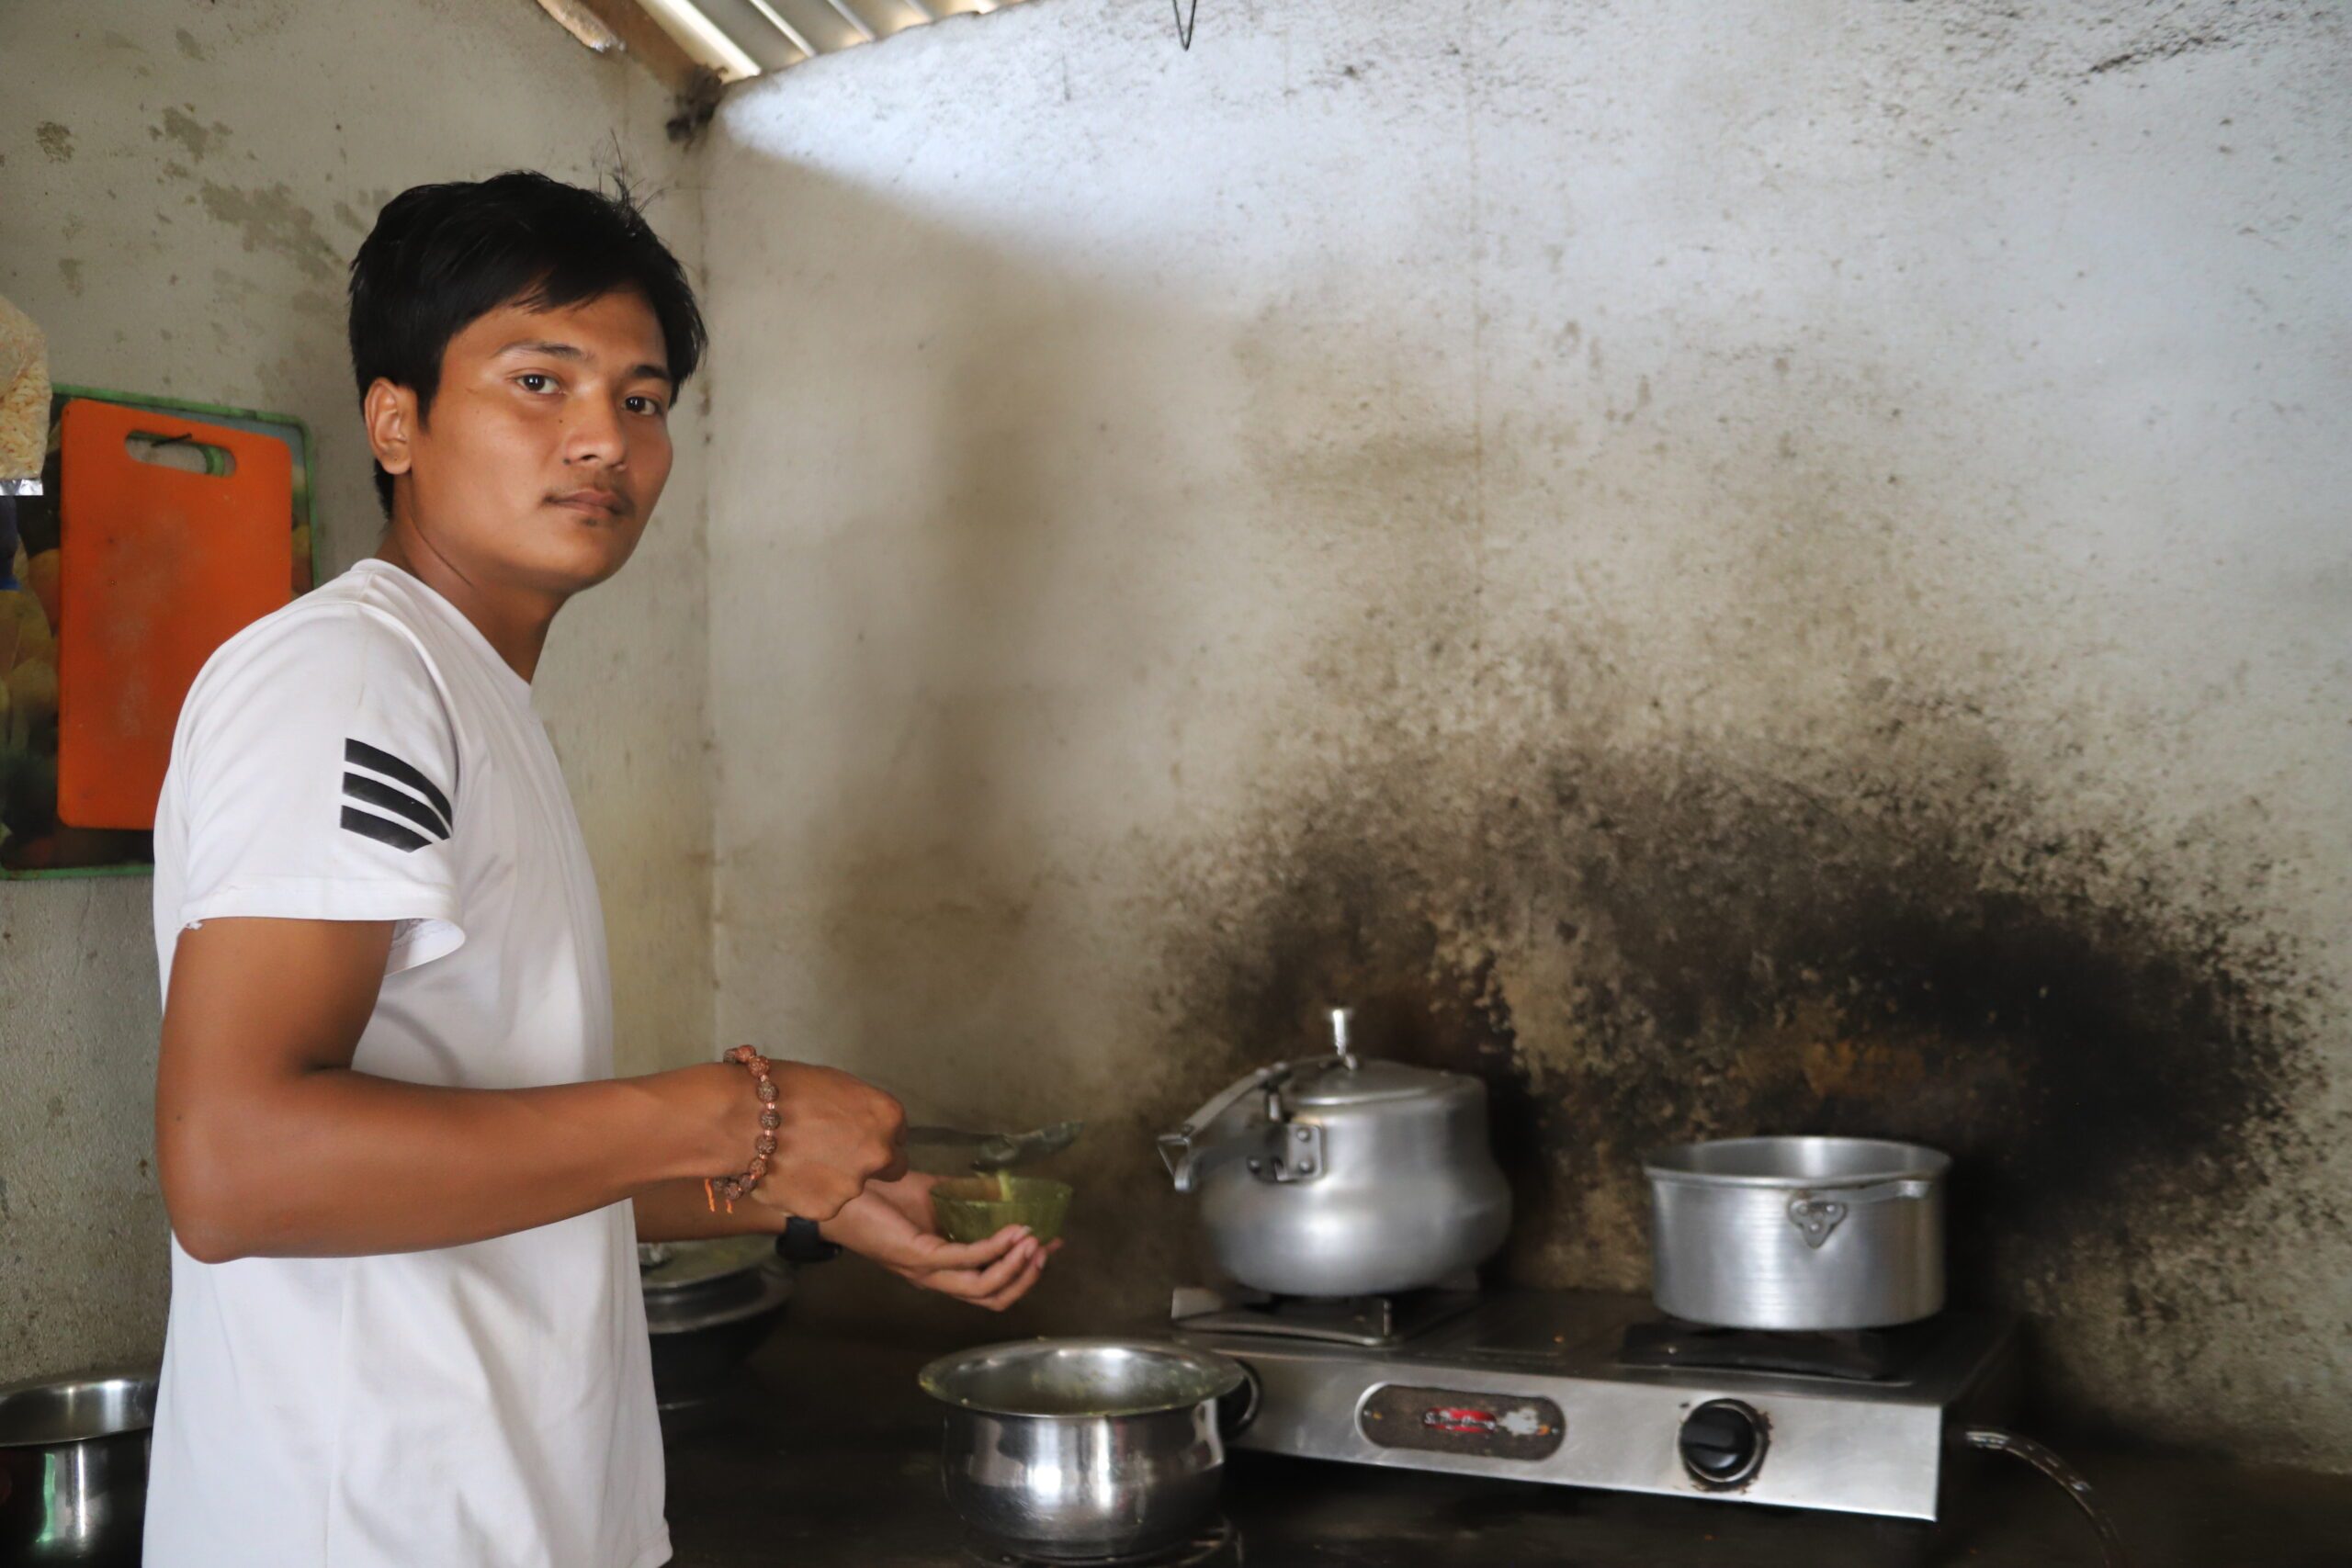 Vivek cooking at home in Nepal